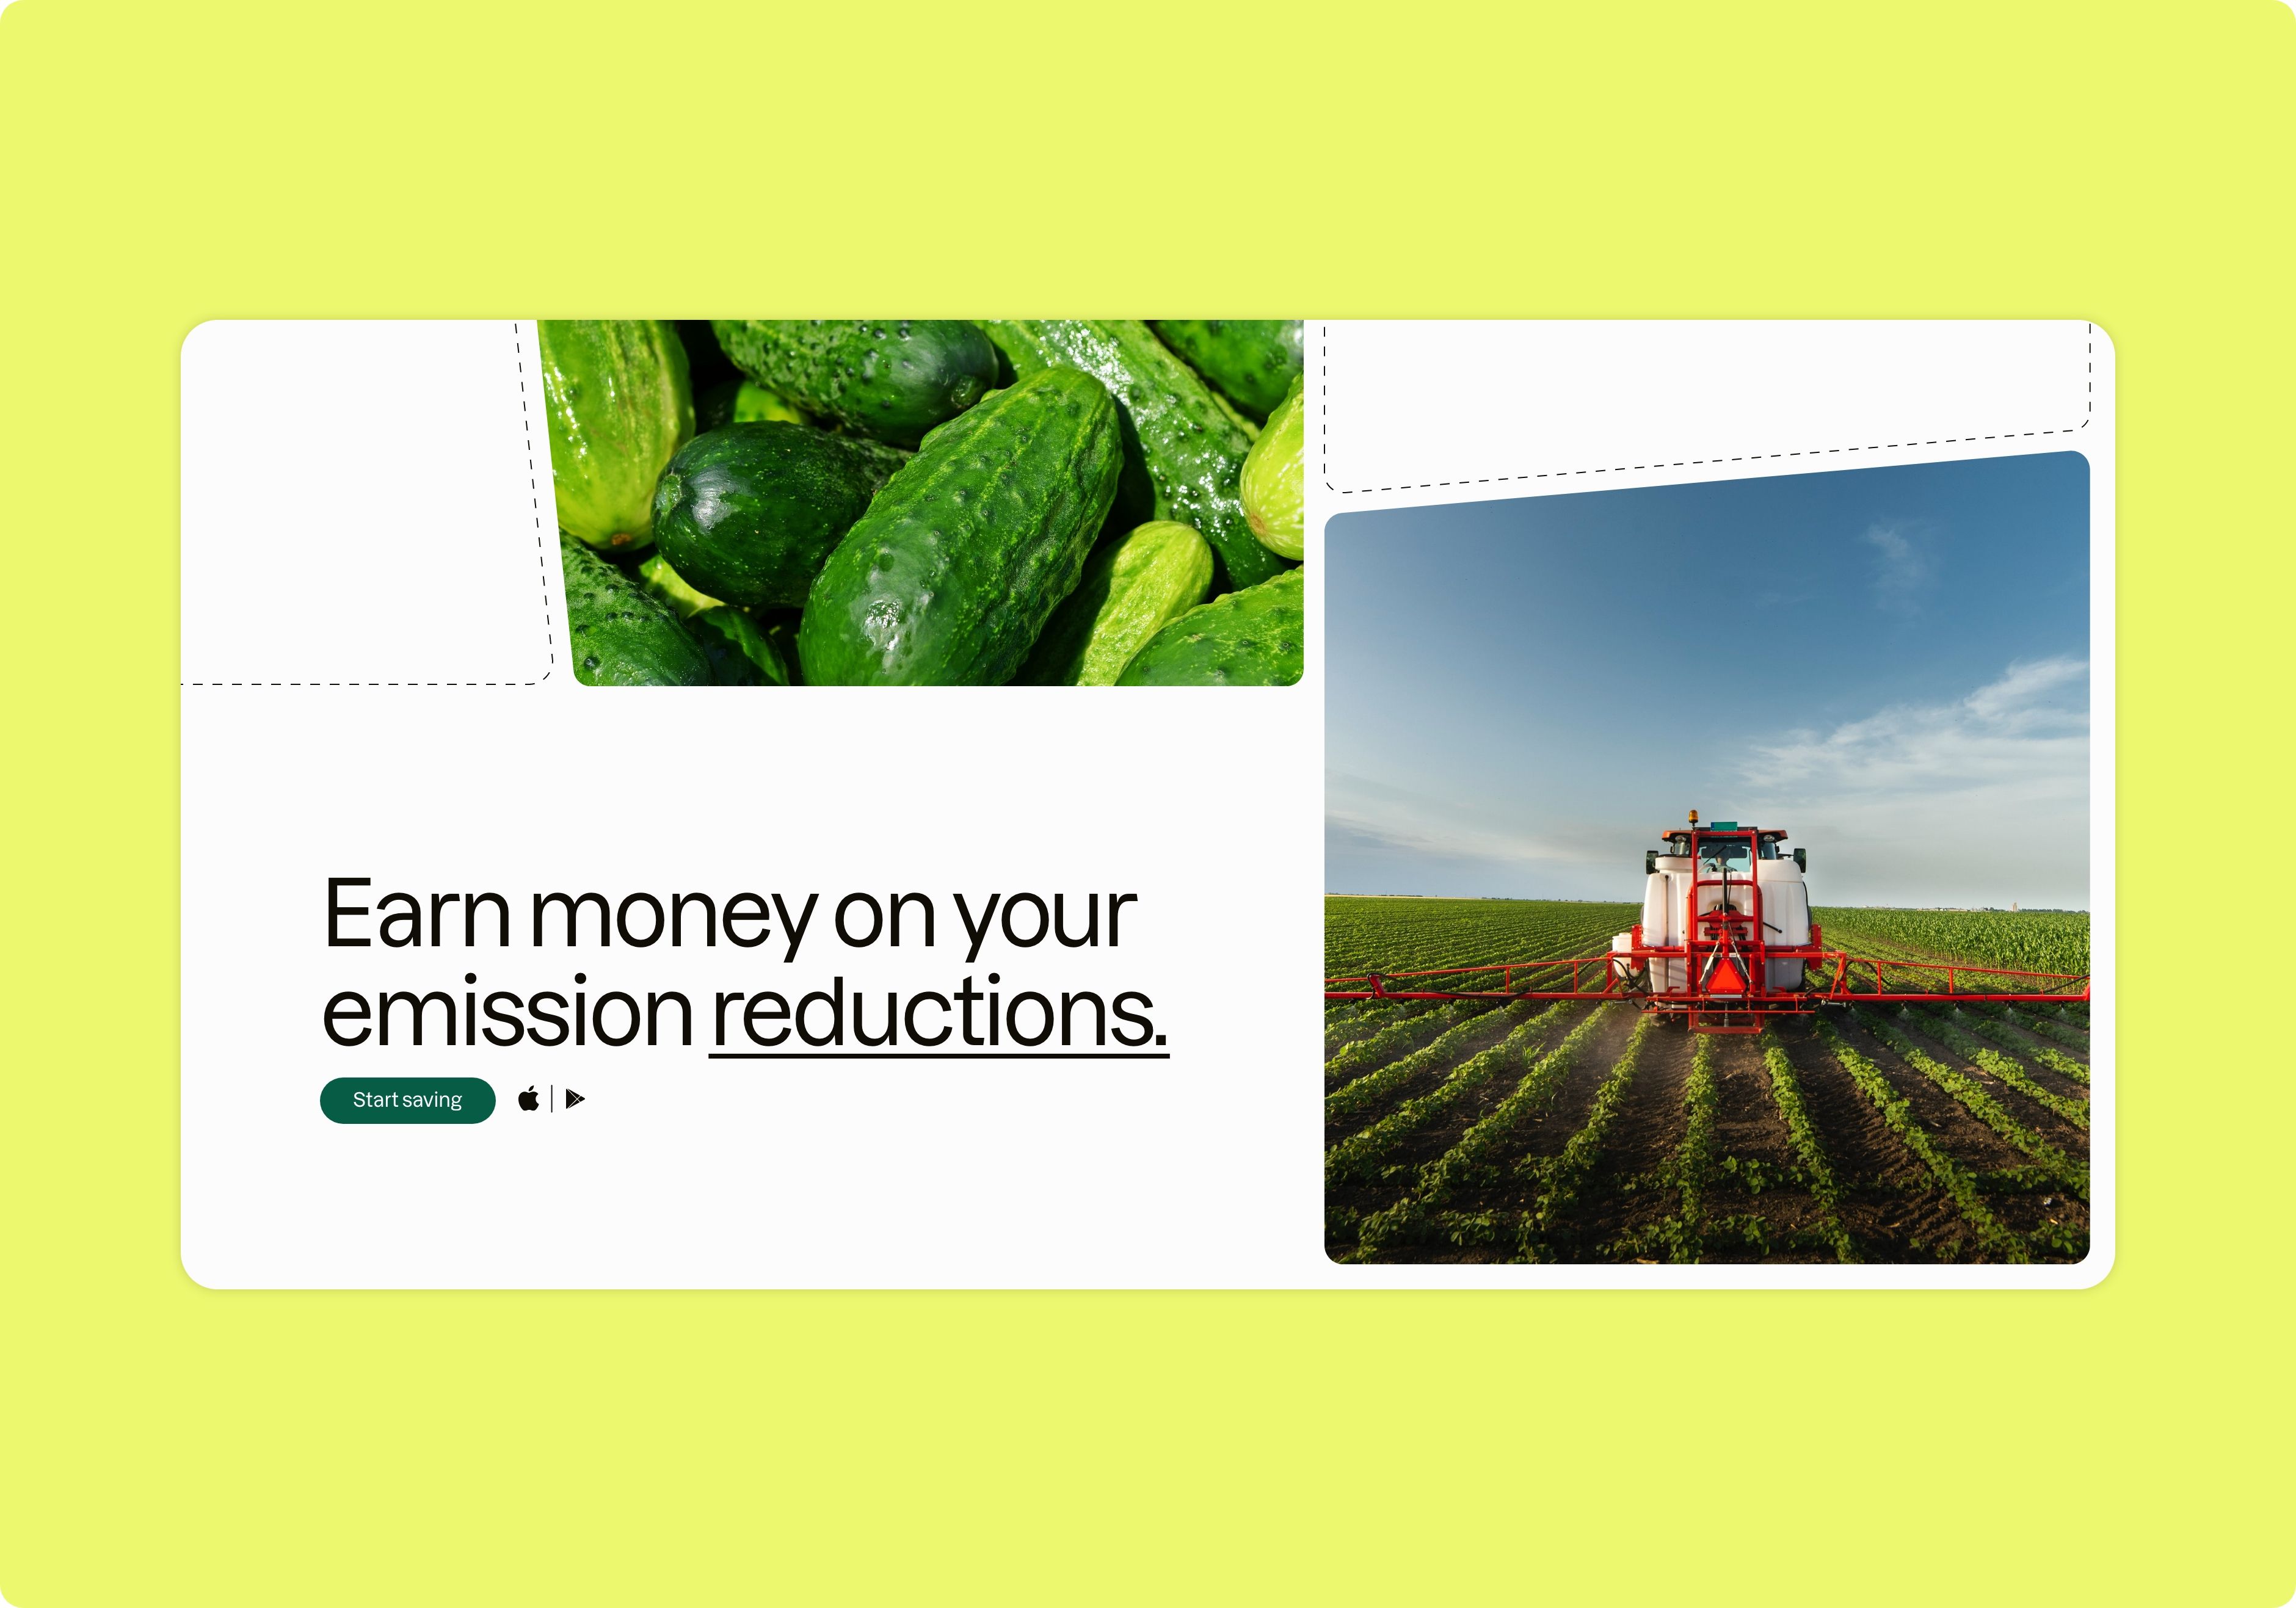 Bright visual asset reading 'Earn money on your emission reductions".